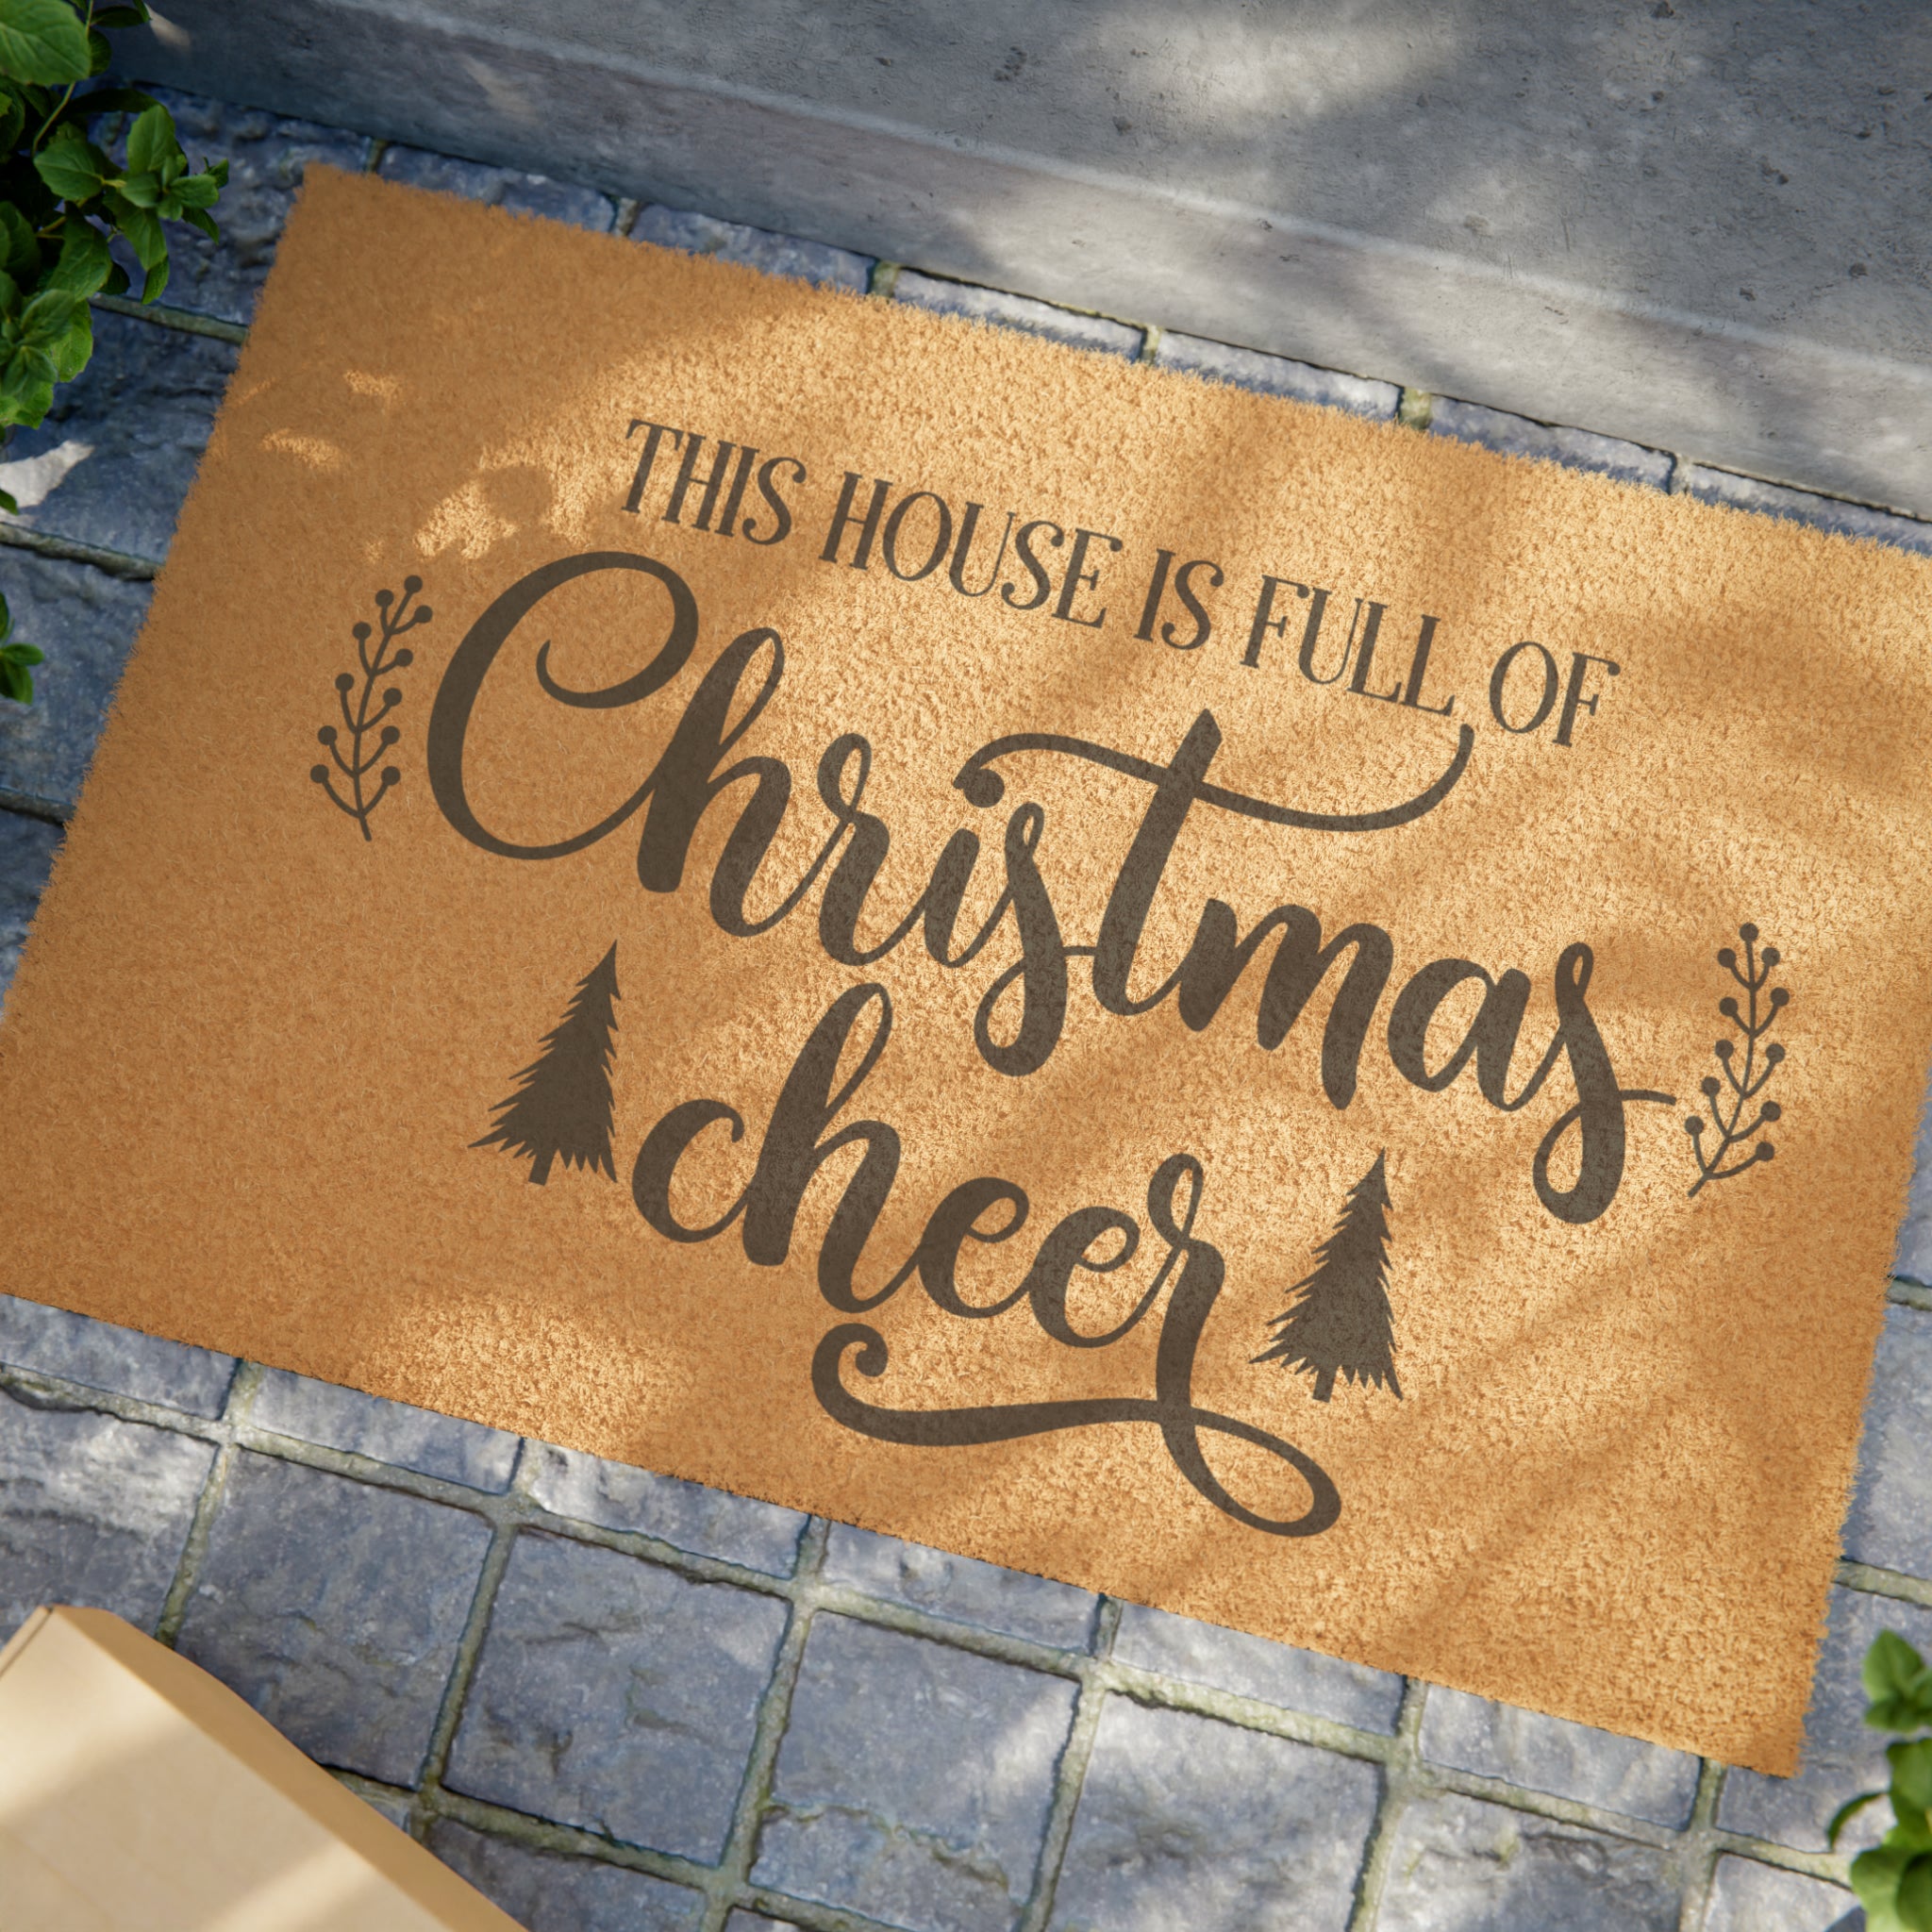 This house is full of Christmas Cheer Doormat Funny Christmas Mat